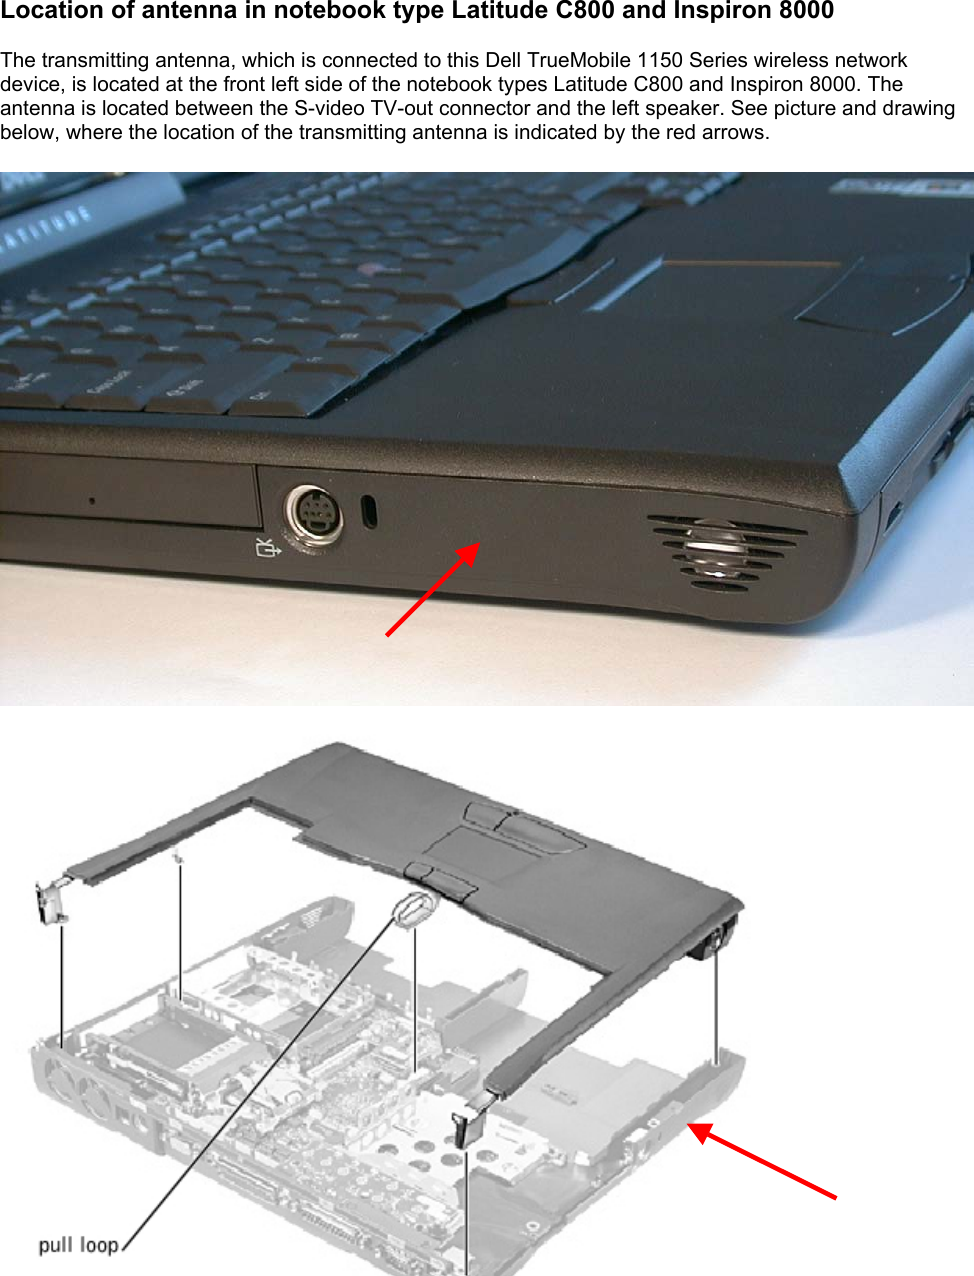 Location of antenna in notebook type Latitude C800 and Inspiron 8000  The transmitting antenna, which is connected to this Dell TrueMobile 1150 Series wireless network device, is located at the front left side of the notebook types Latitude C800 and Inspiron 8000. The antenna is located between the S-video TV-out connector and the left speaker. See picture and drawing below, where the location of the transmitting antenna is indicated by the red arrows.    